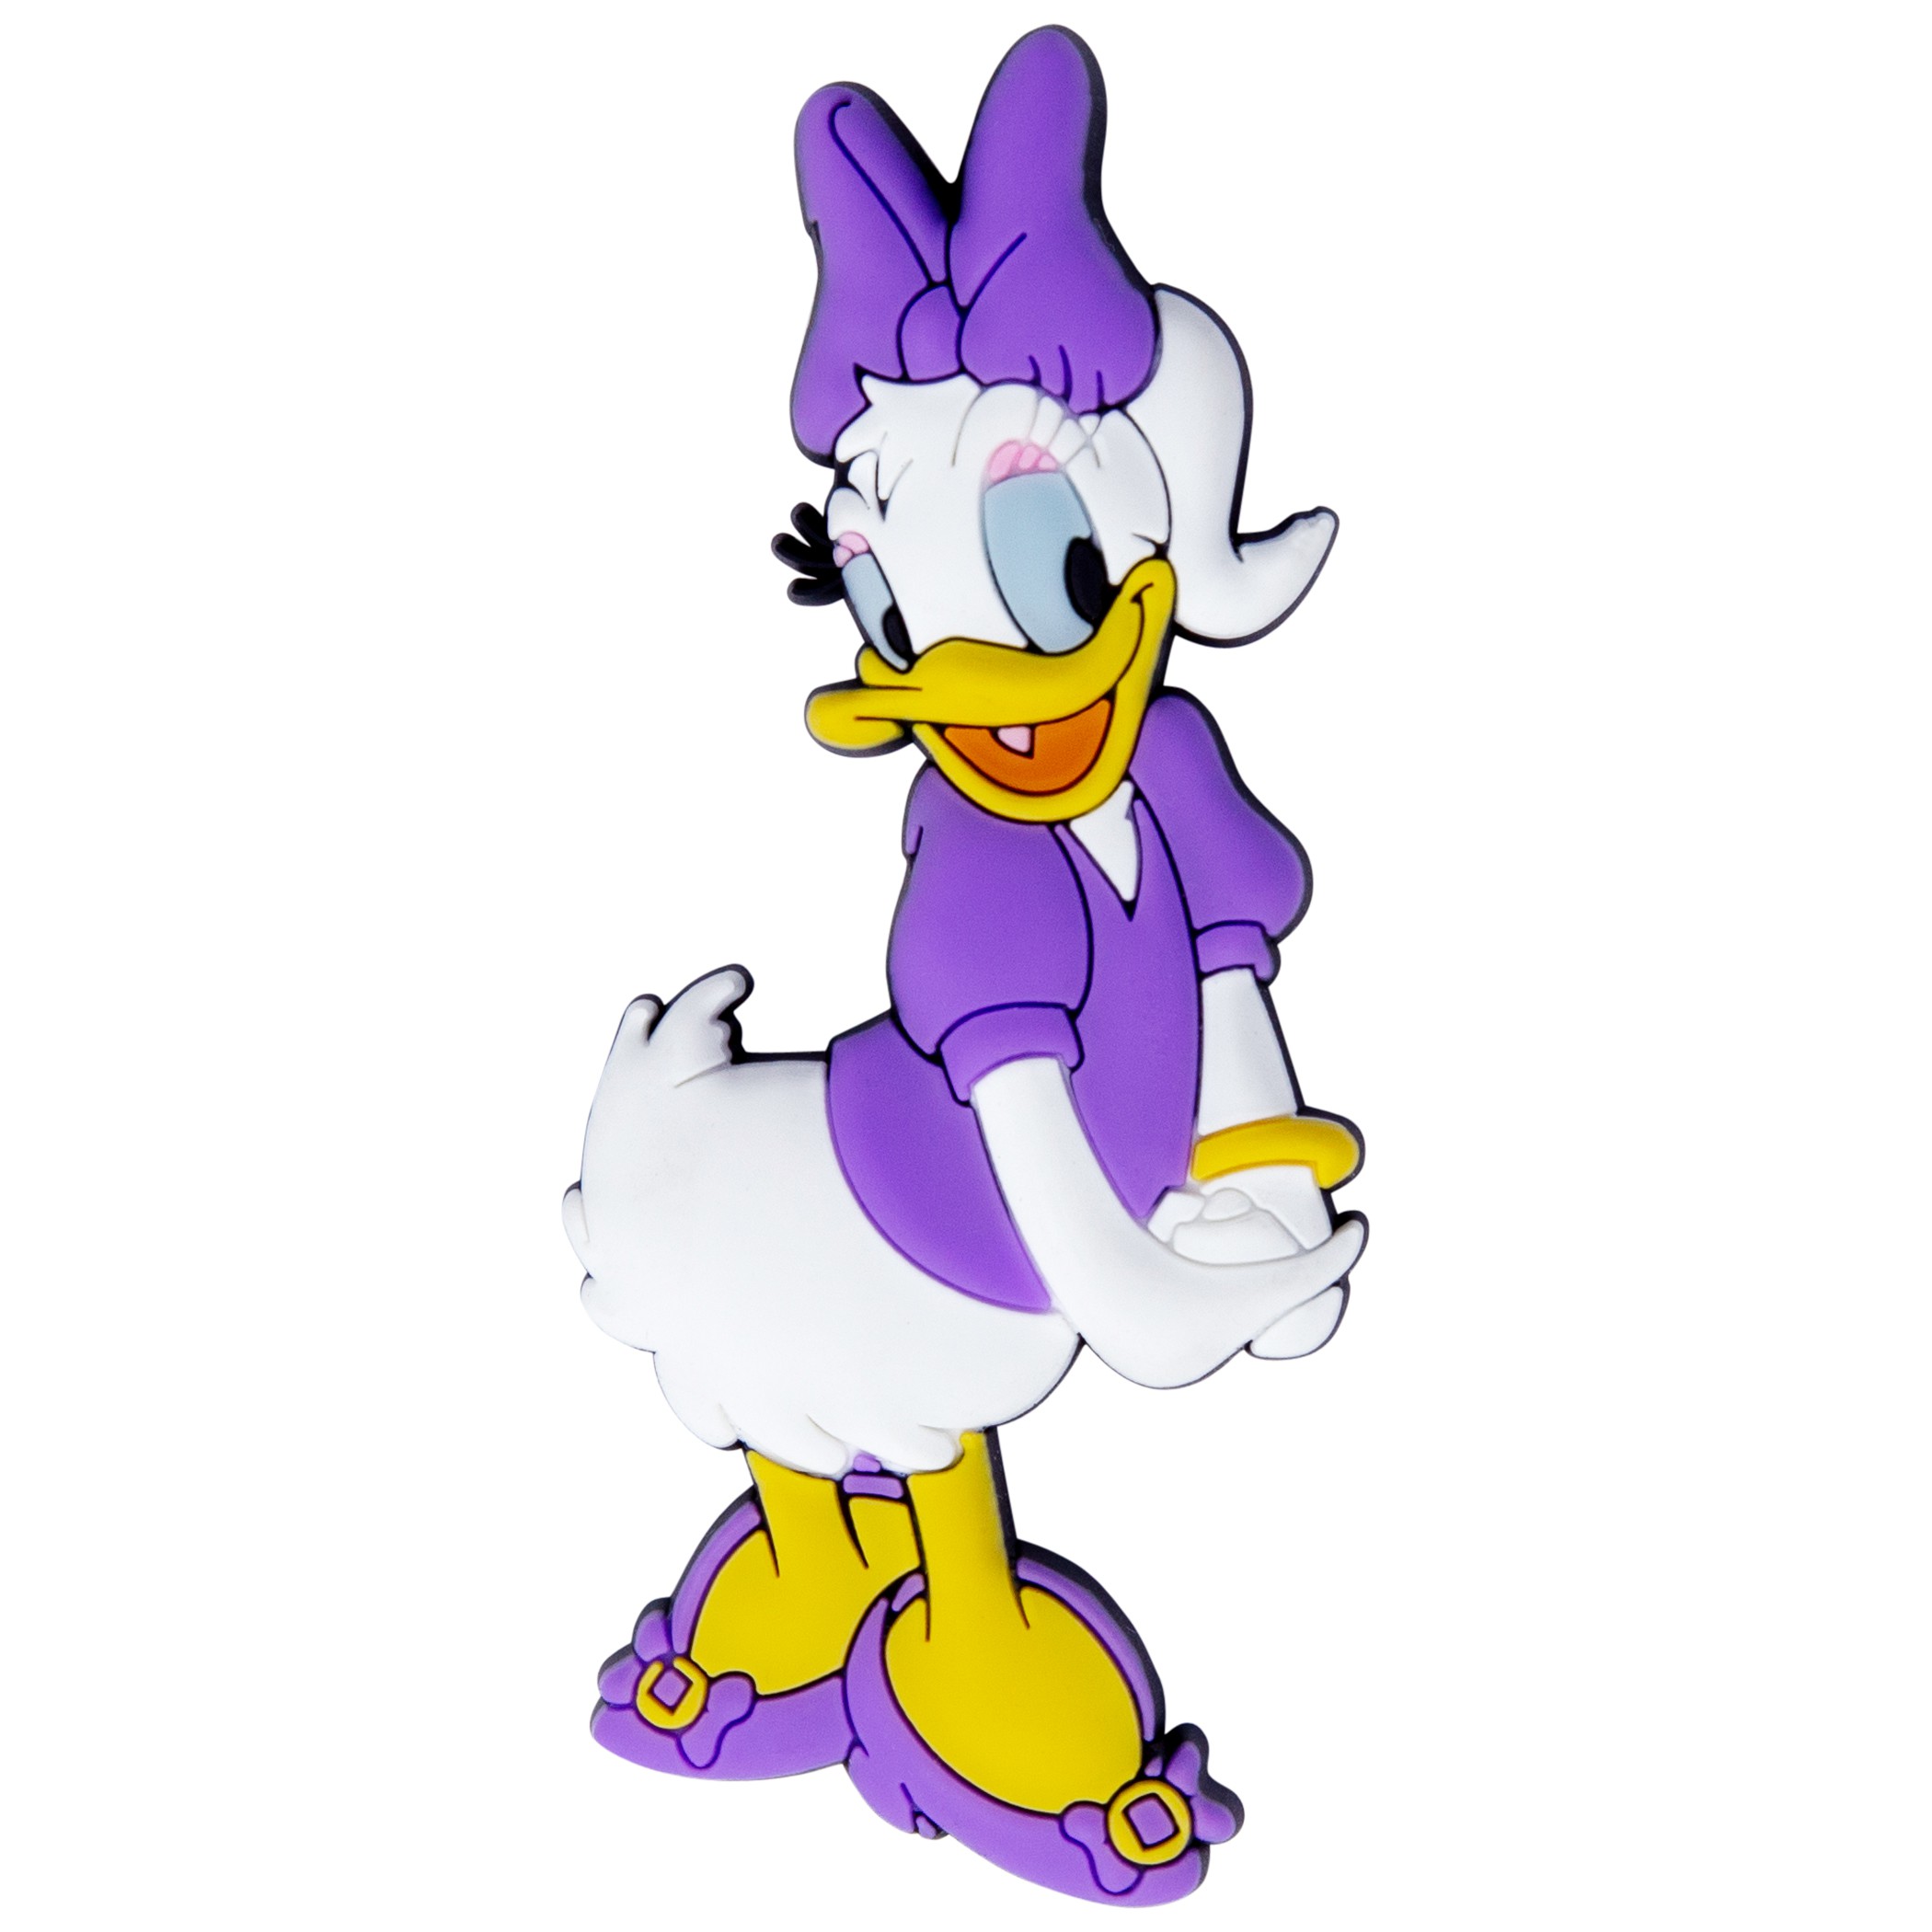 Daisy Duck Soft Touch Magnet